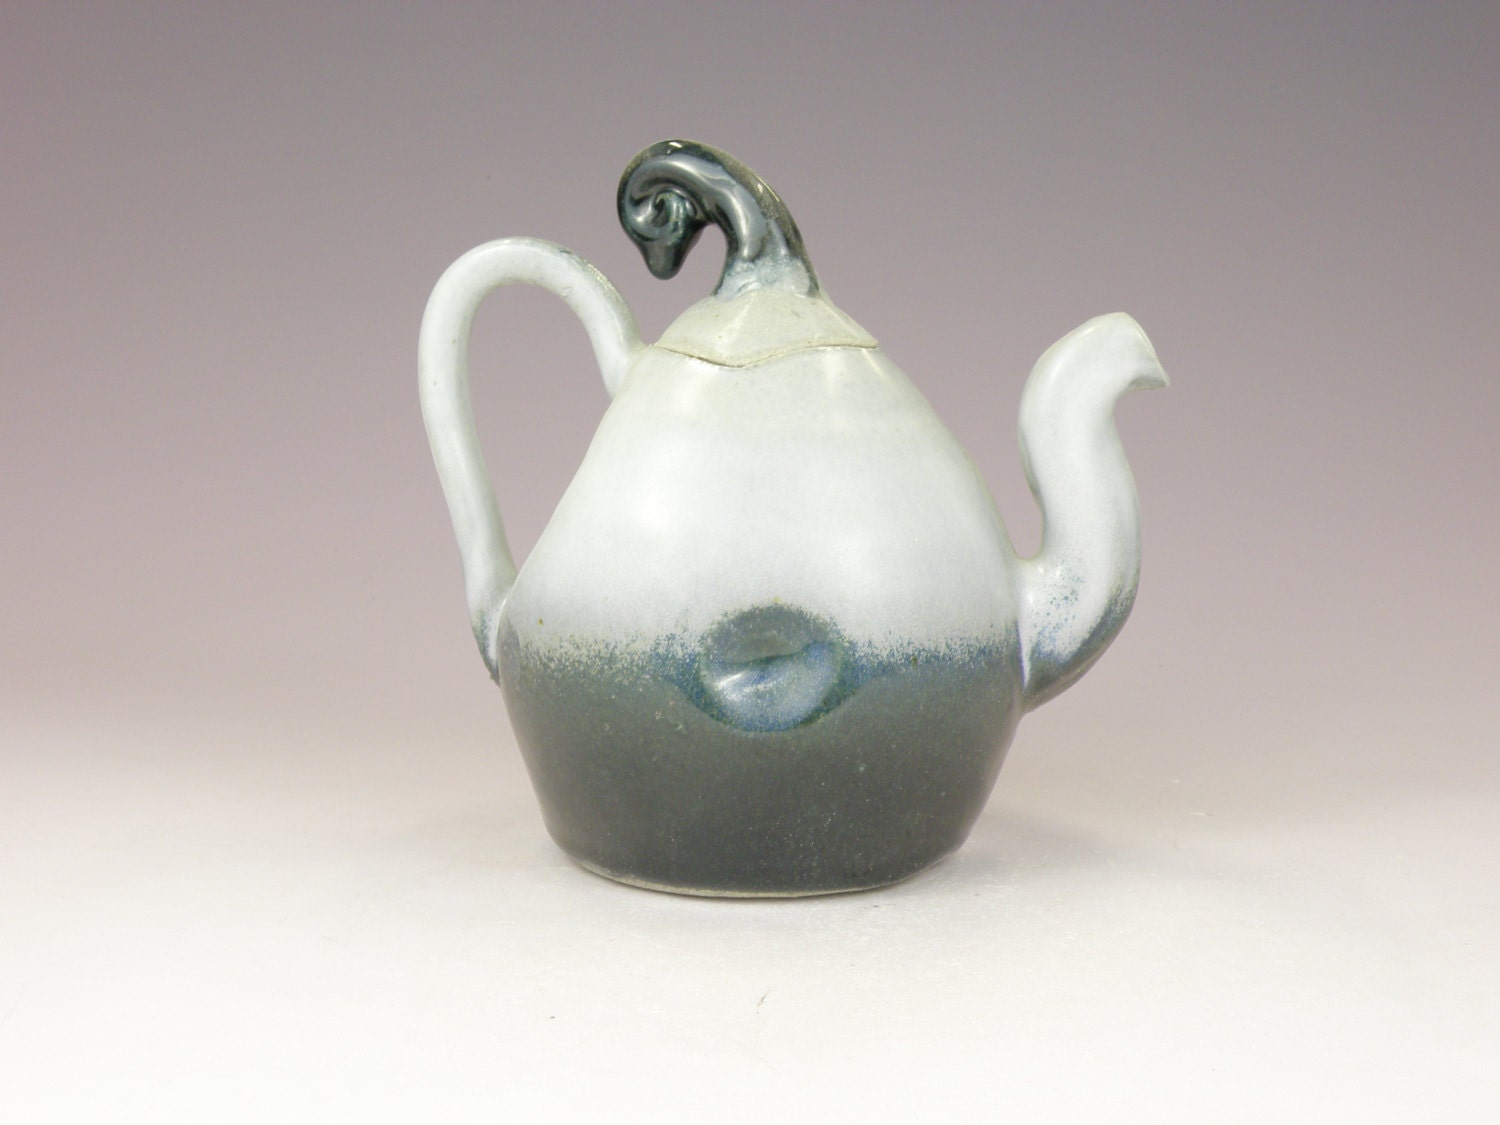 Fade to Black Handmade Ceramic Teapot by AntwarePottery on 